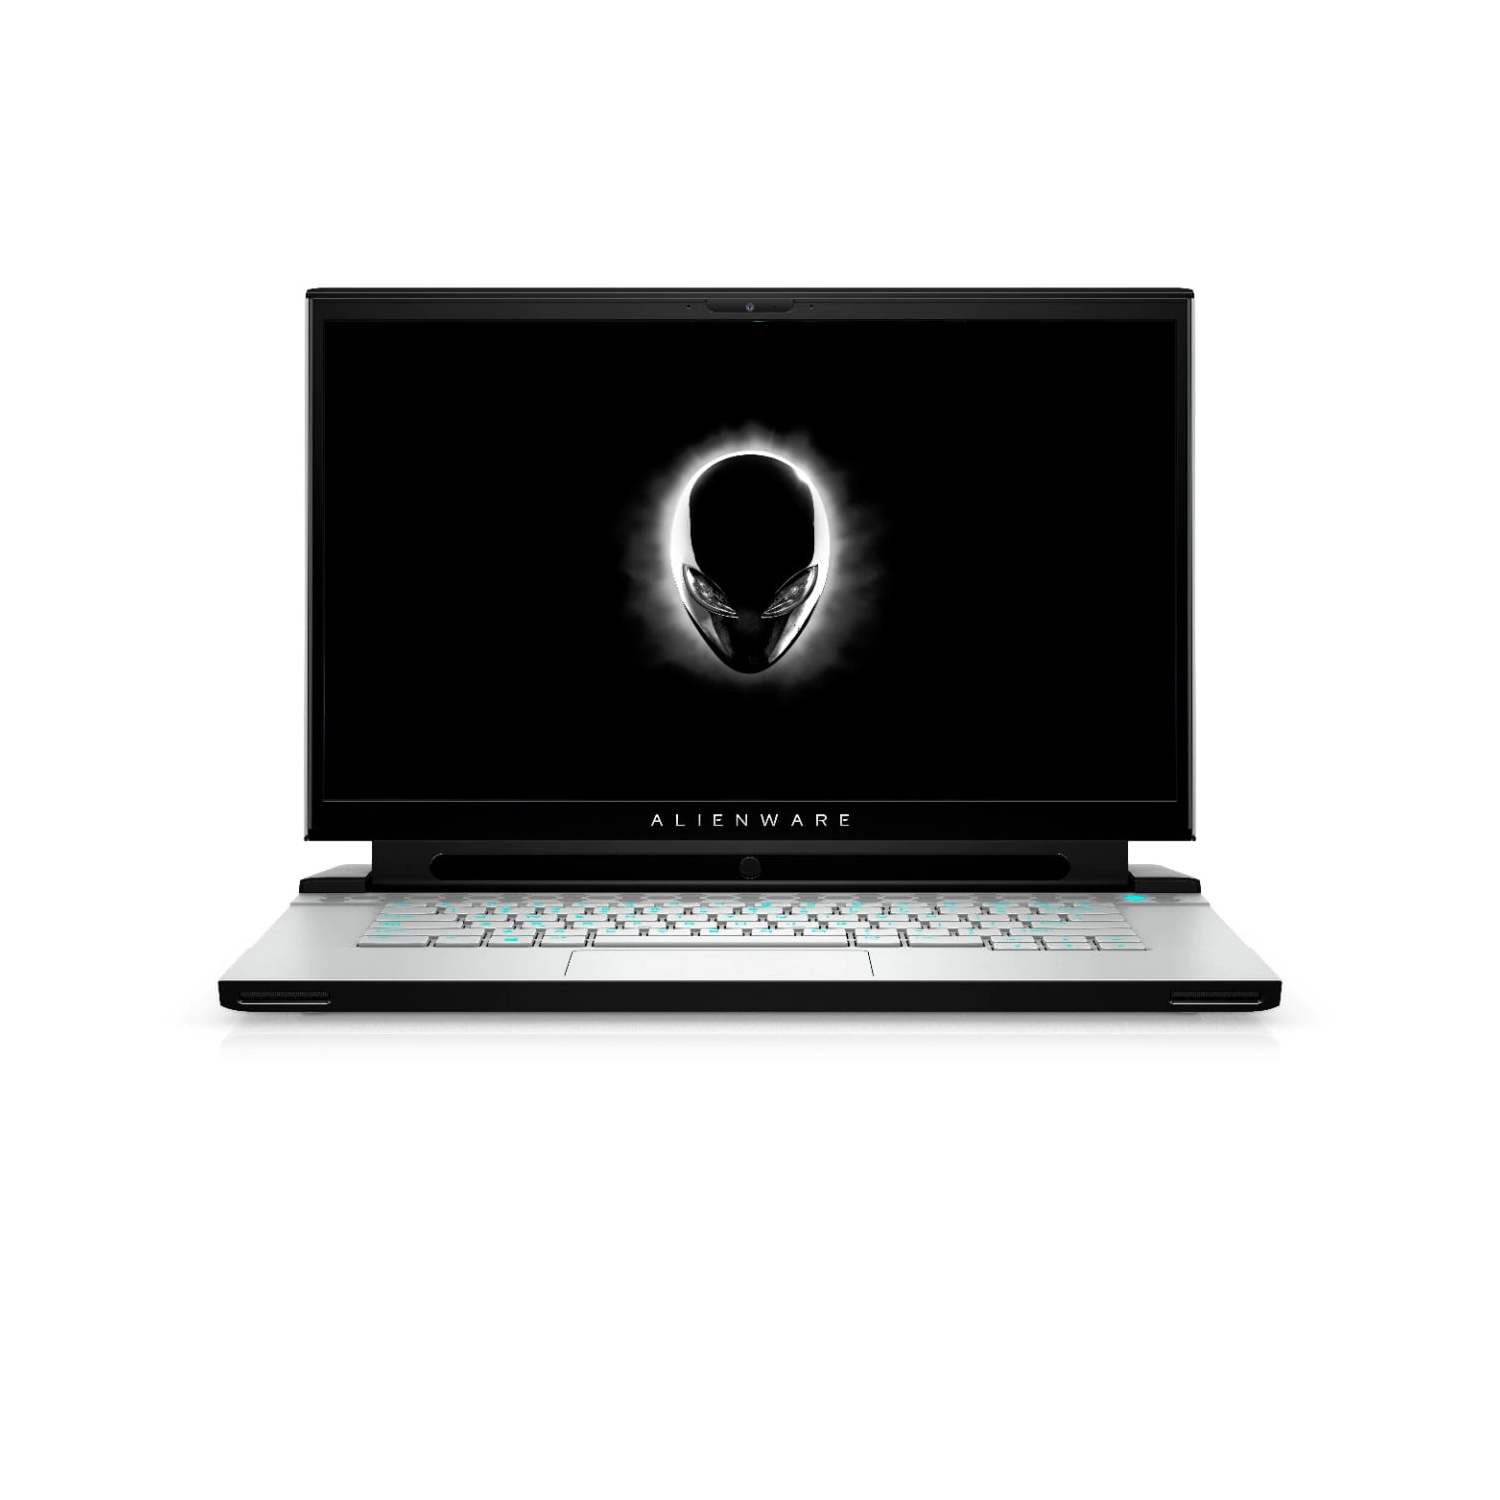 Refurbished (Excellent) - Dell Alienware m15 R3 Gaming Laptop (2020), 15.6" FHD, Core i7, 1TB SSD + 512GB SSD, 32GB RAM, 2070 Super, 5 GHz, 10th Gen CPU Certified